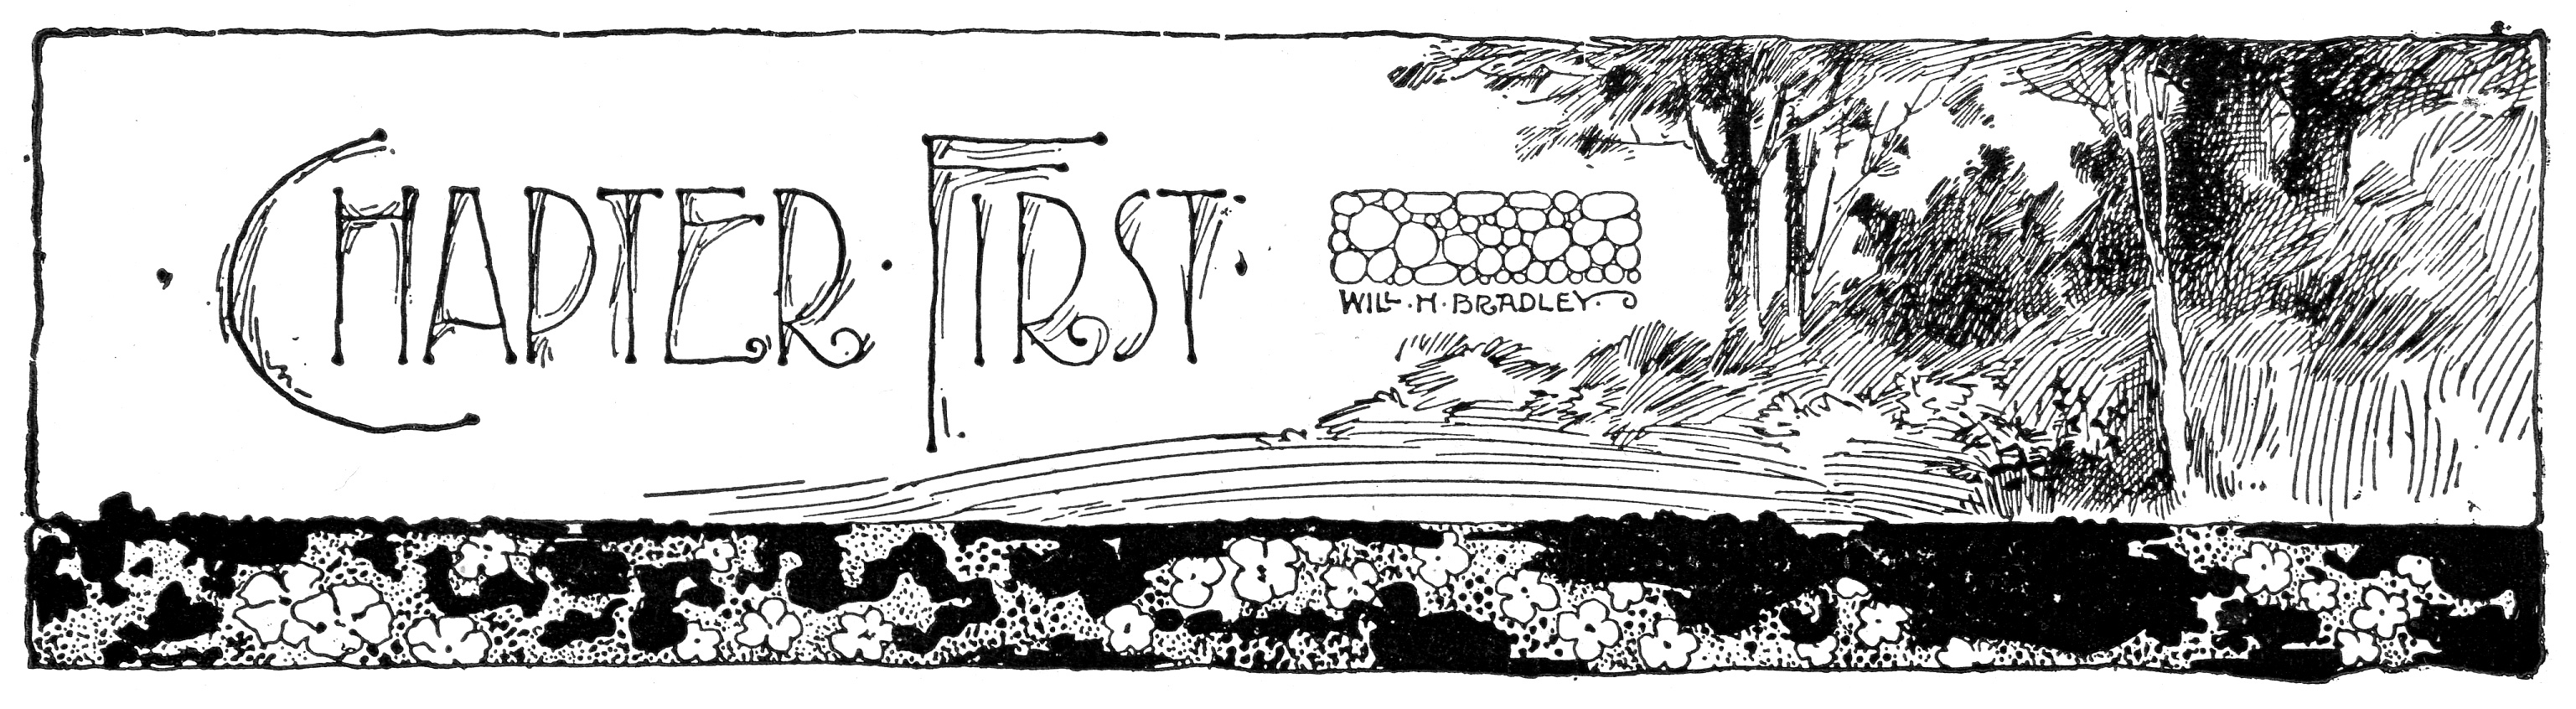 A2.2, Chapter heading illustration by Will H. Bradley